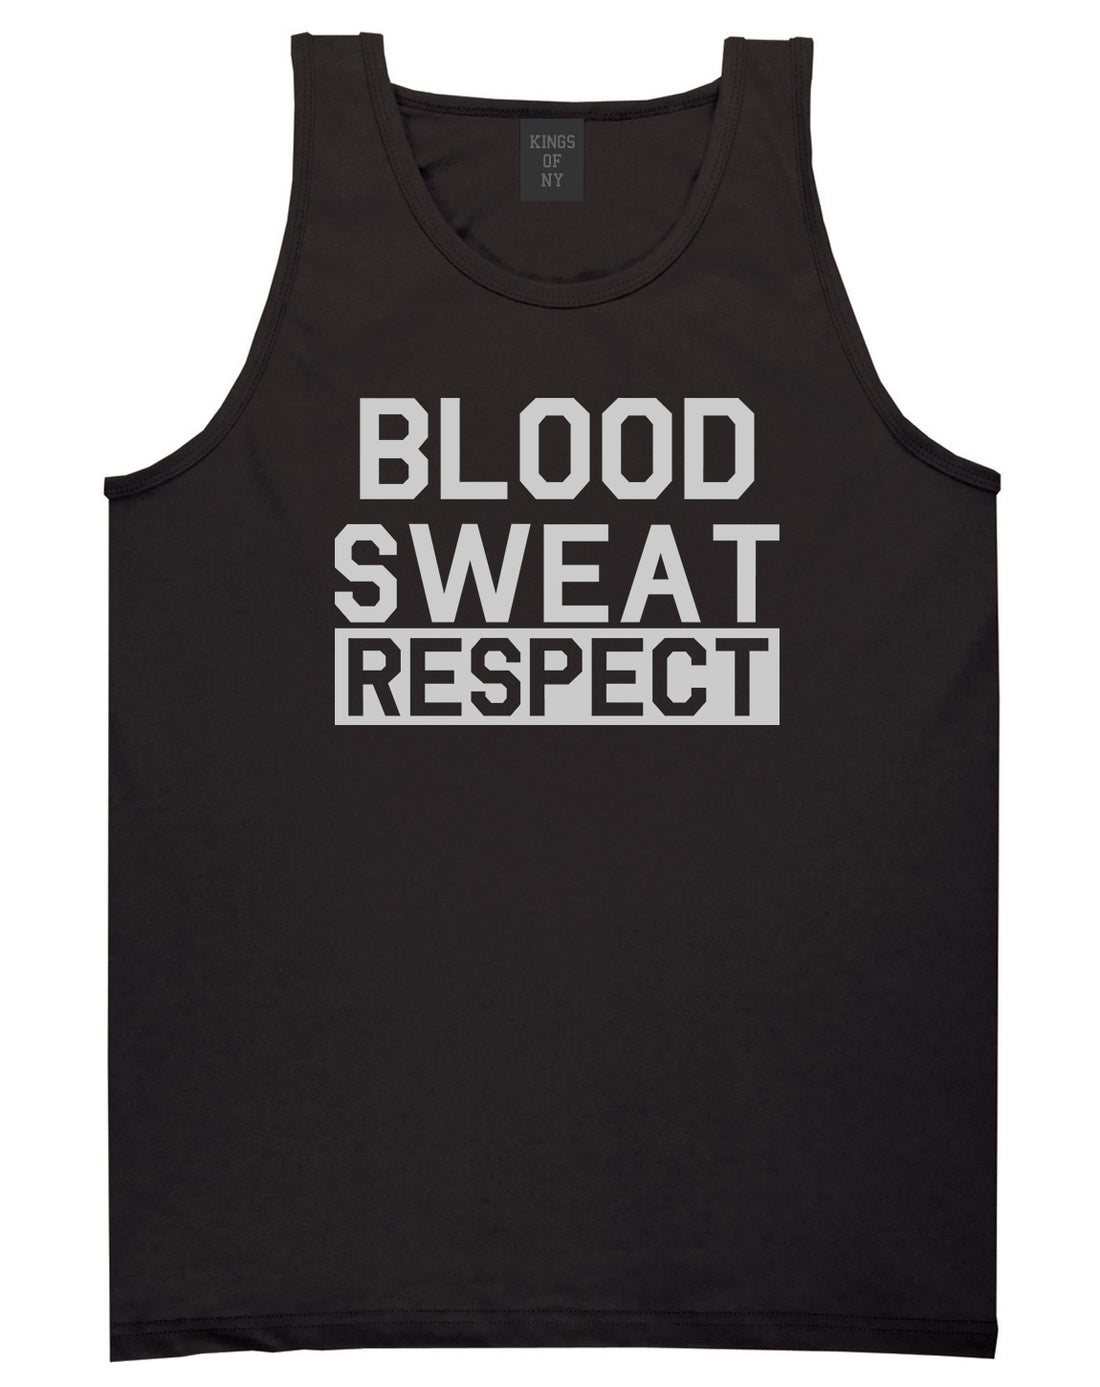 Blood Sweat Respect Gym Workout Mens Tank Top Shirt Black by Kings Of NY